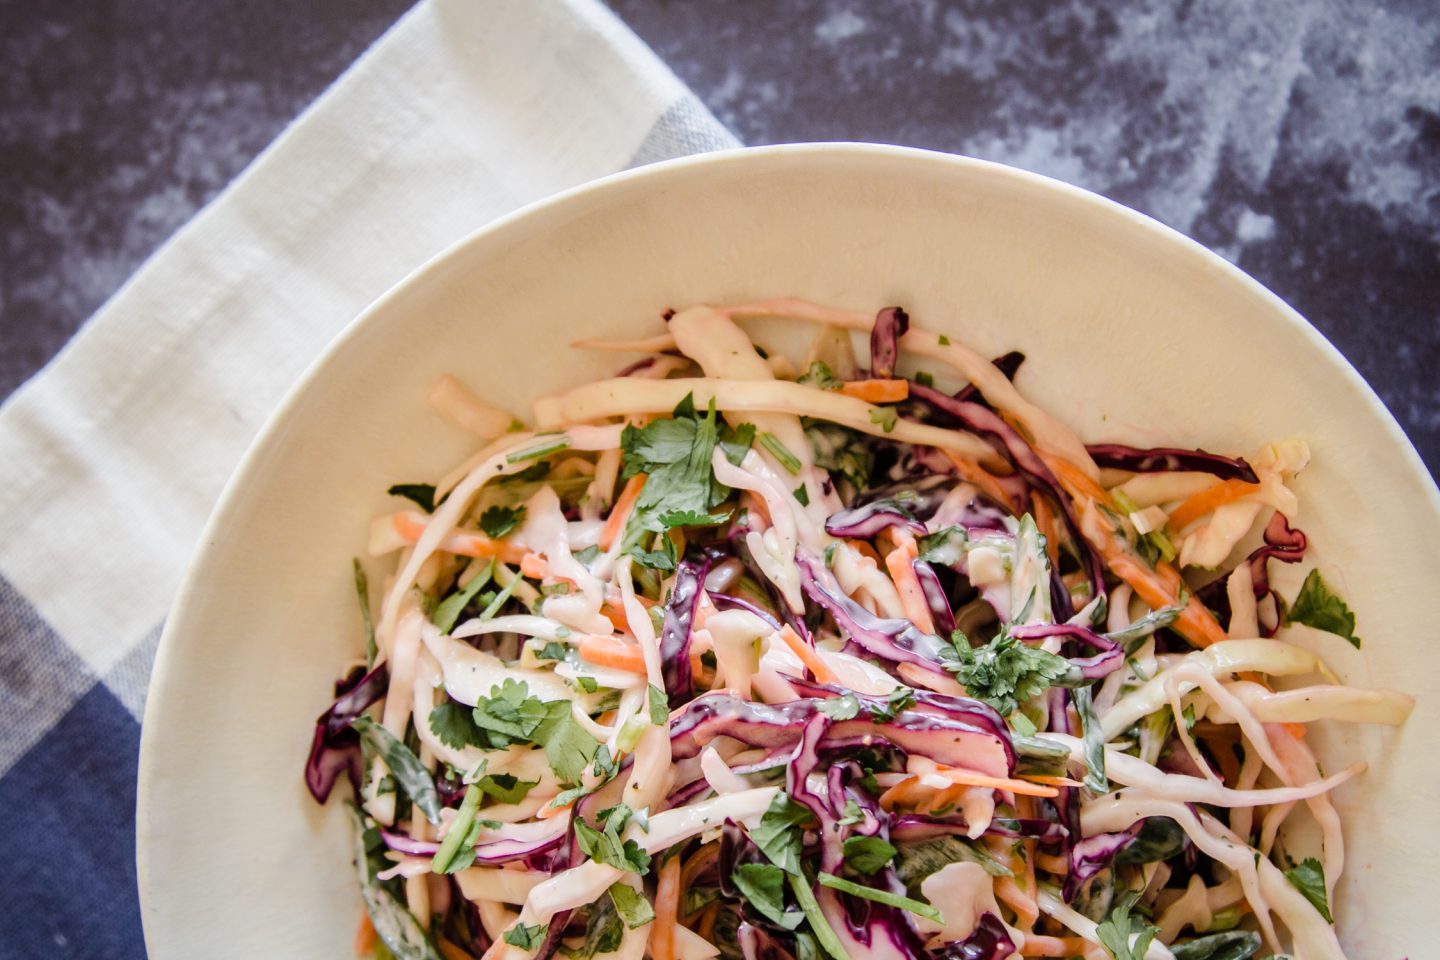 How to Make Tequila Coleslaw